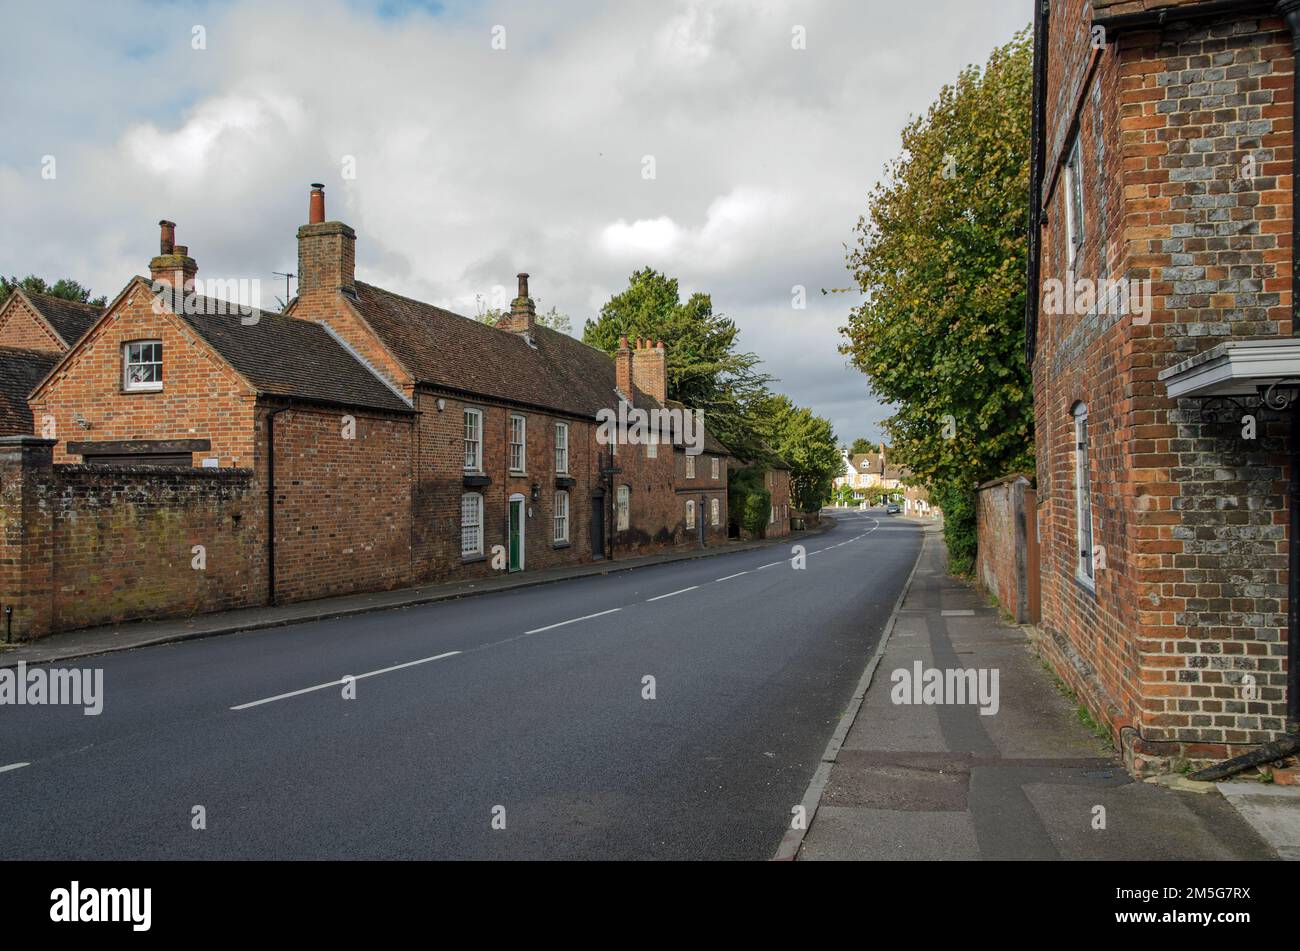 View along the main road known as The Street in the historic village of Aldermaston in Berkshire. Stock Photo